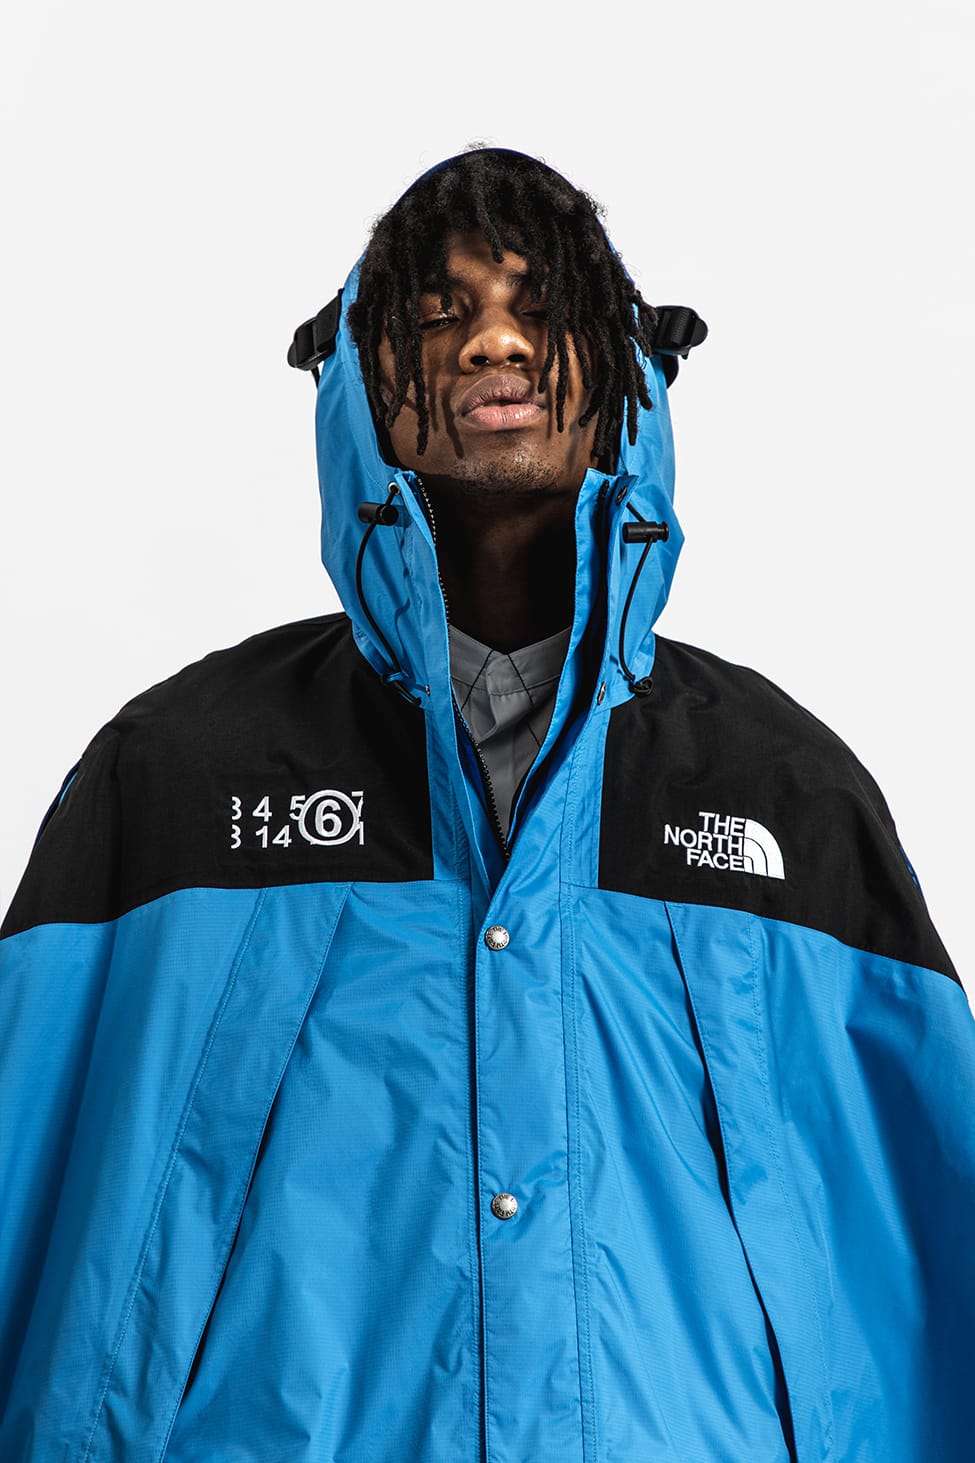 outerwear north face